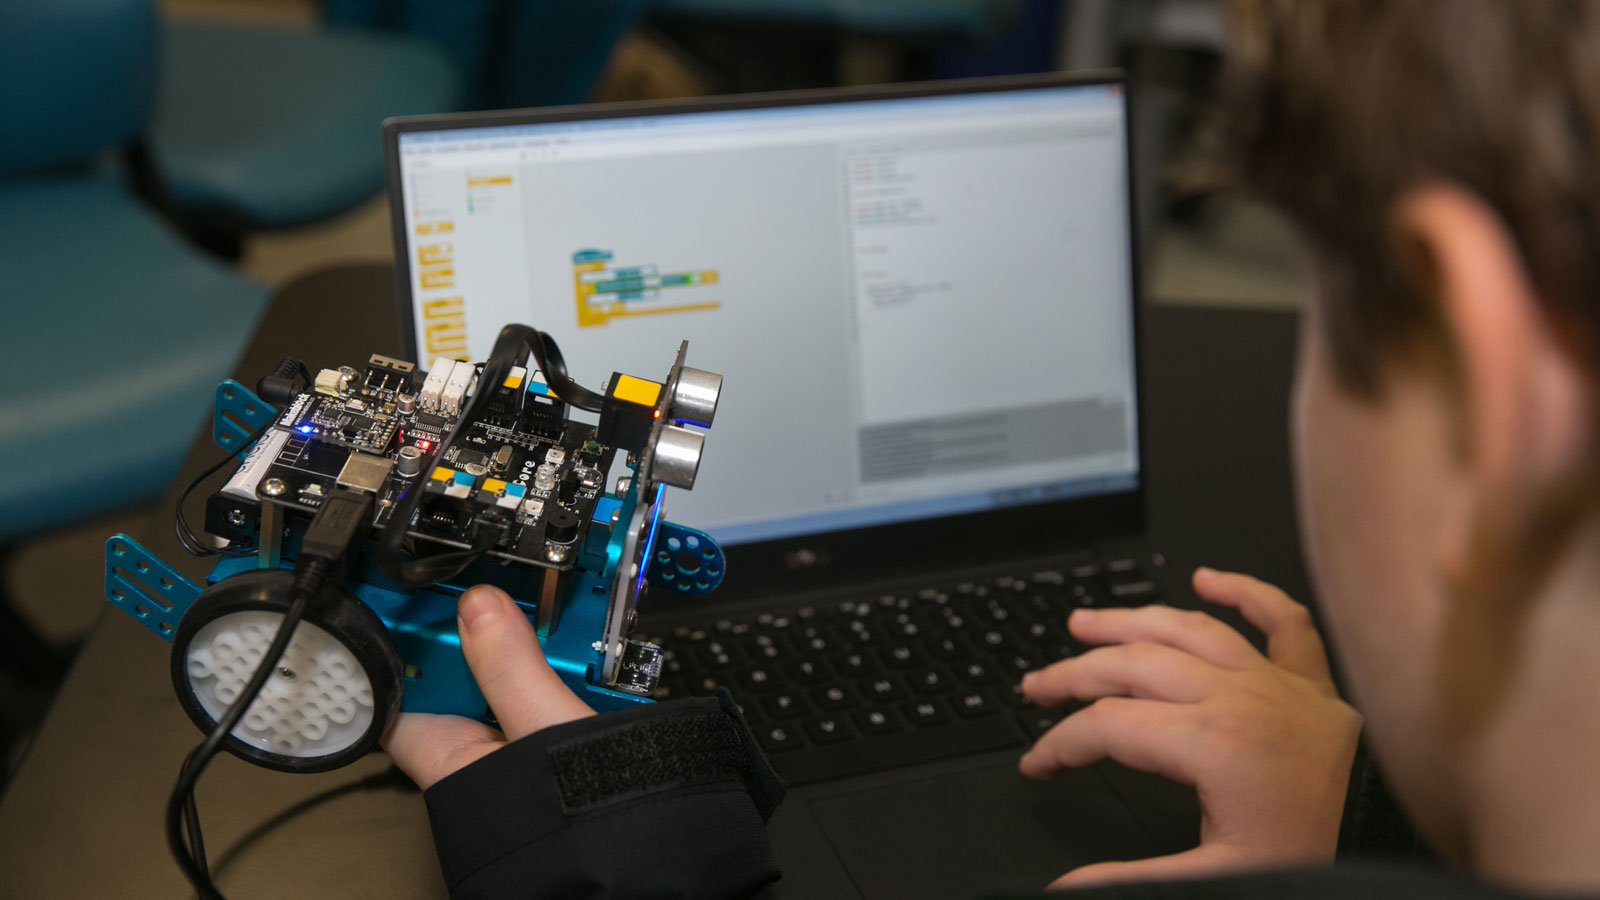 A student programs a LEGO robot using a diagram displayed on a computer screen.